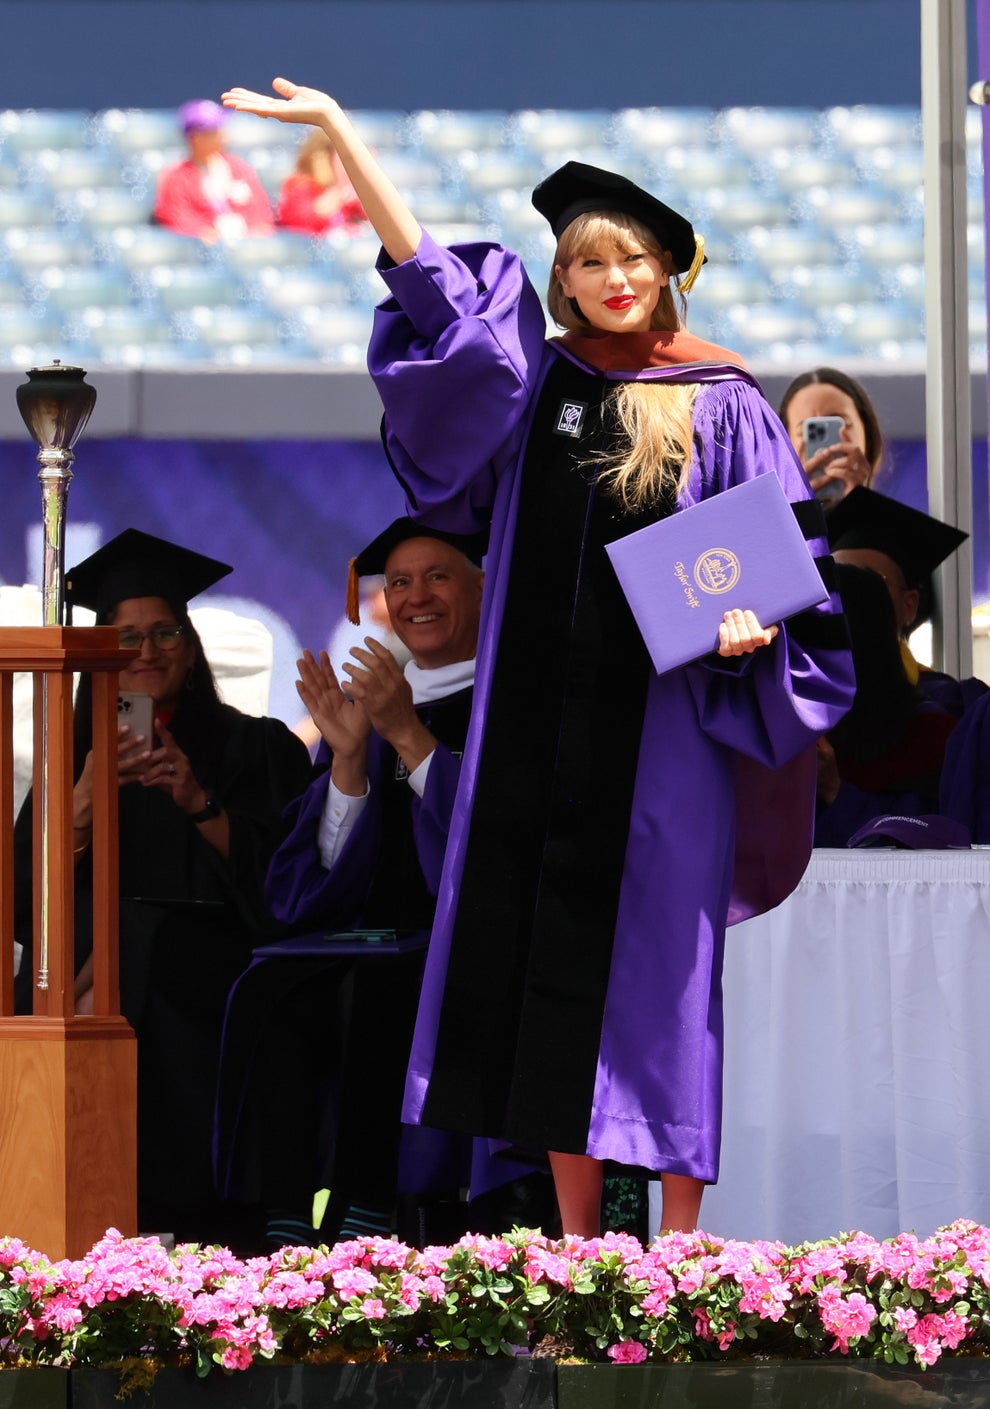 Quotes From Taylor Swift's NYU Commencement Speech